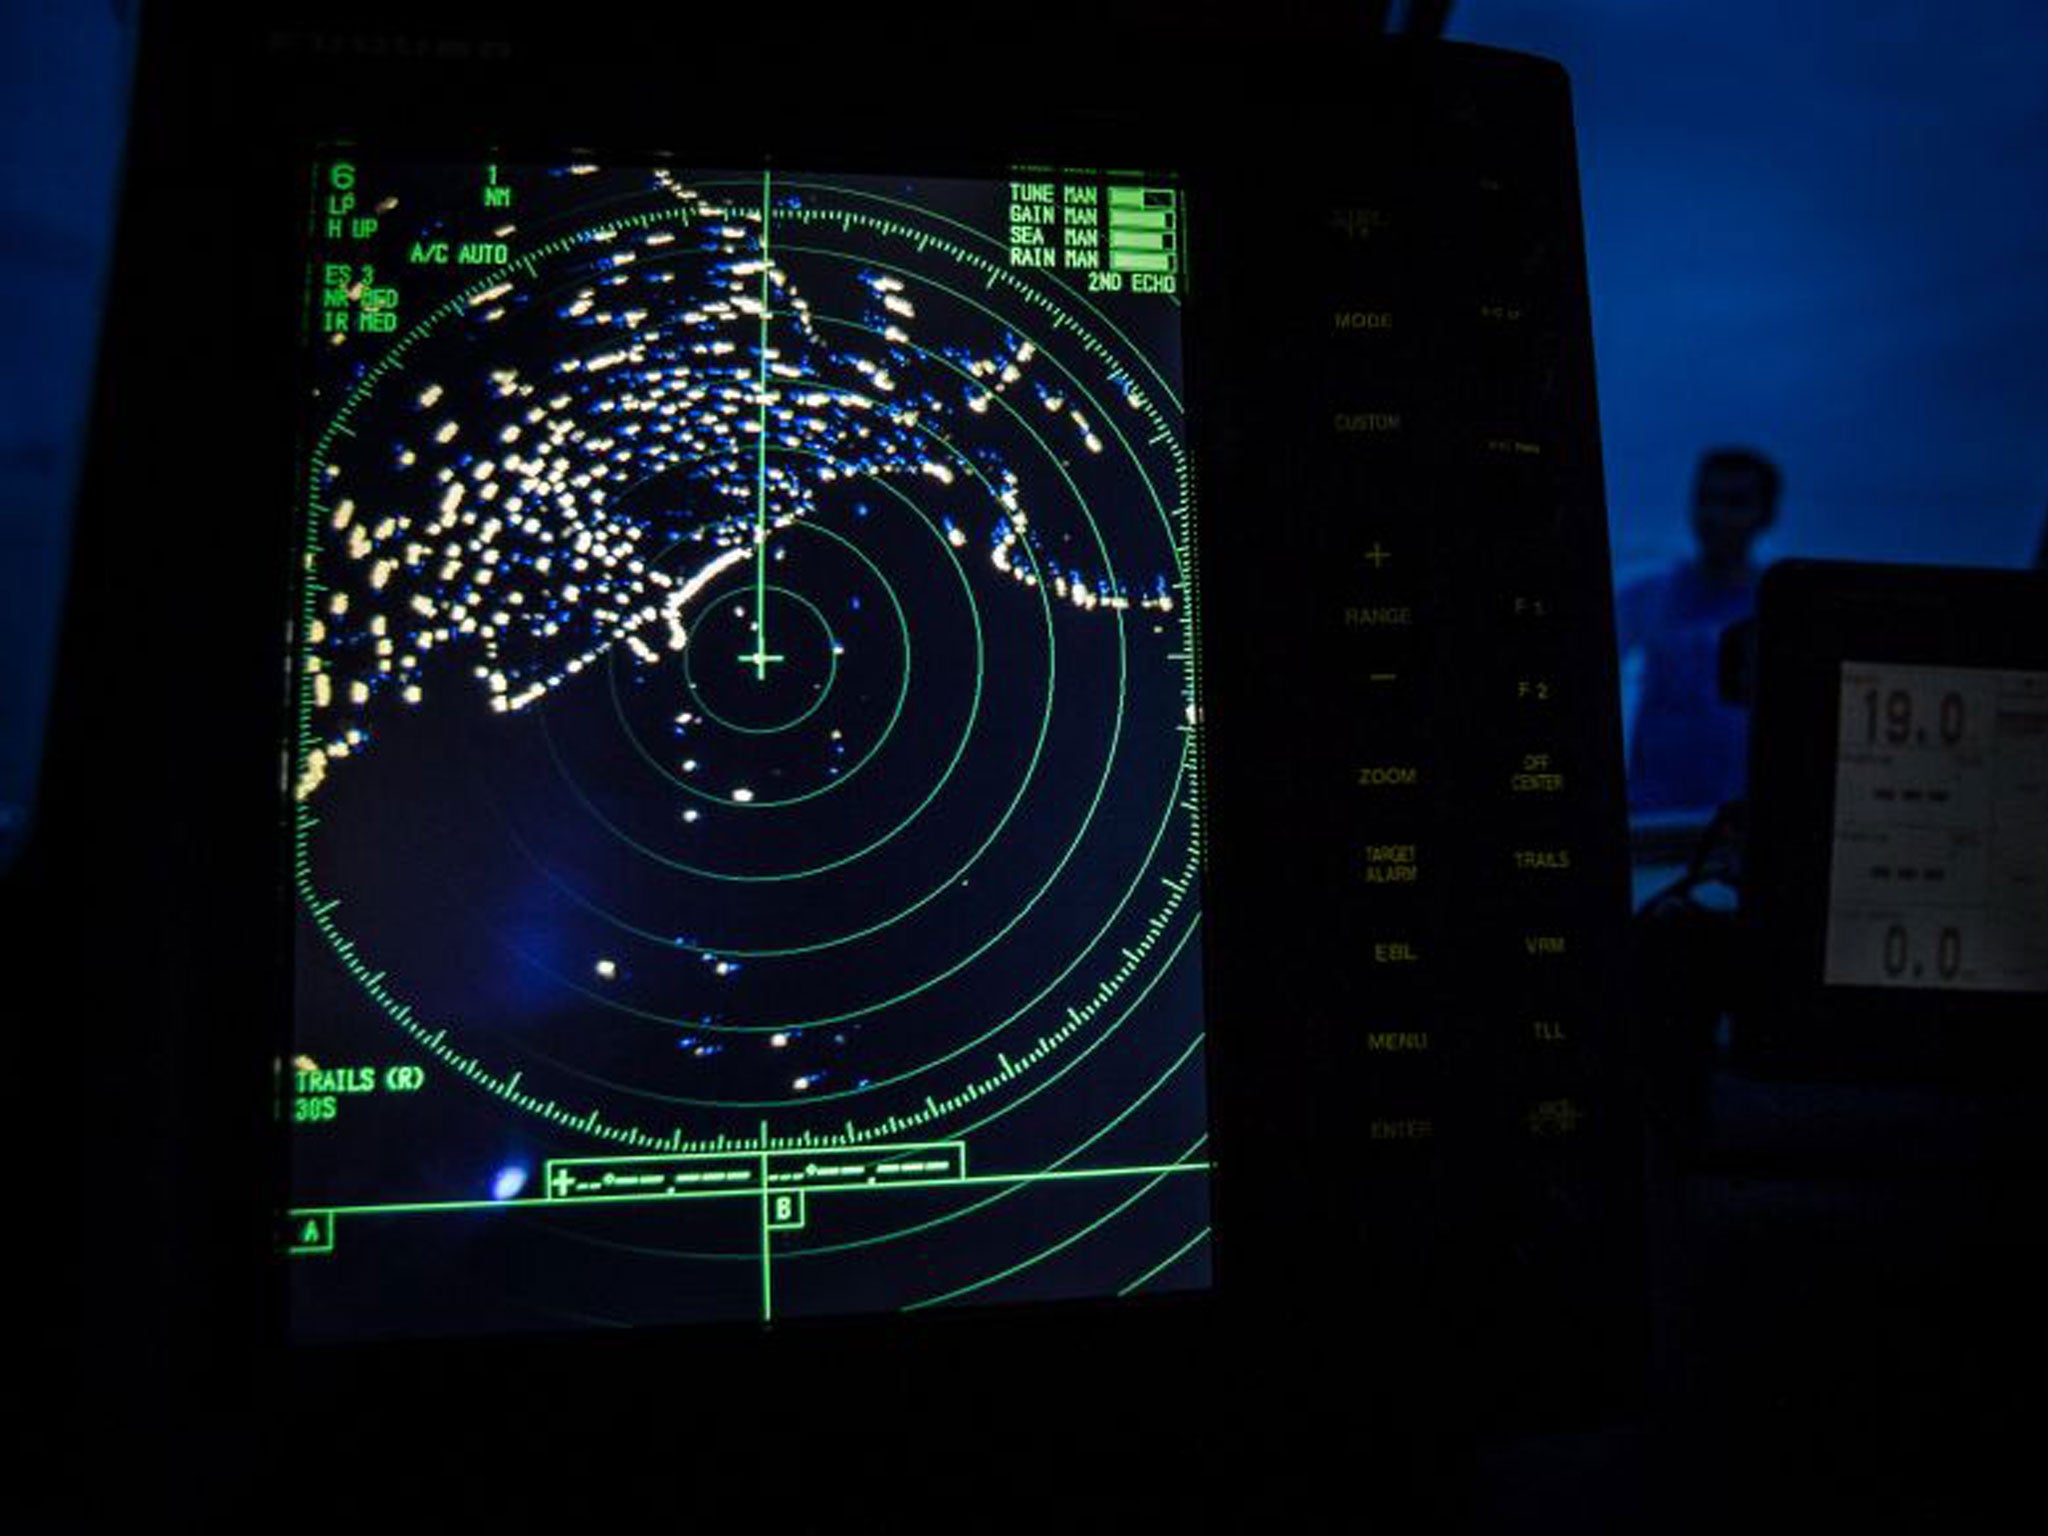 A navigational radar on Indonesia's National Search and Rescue boat shows details during a search in the Andaman sea